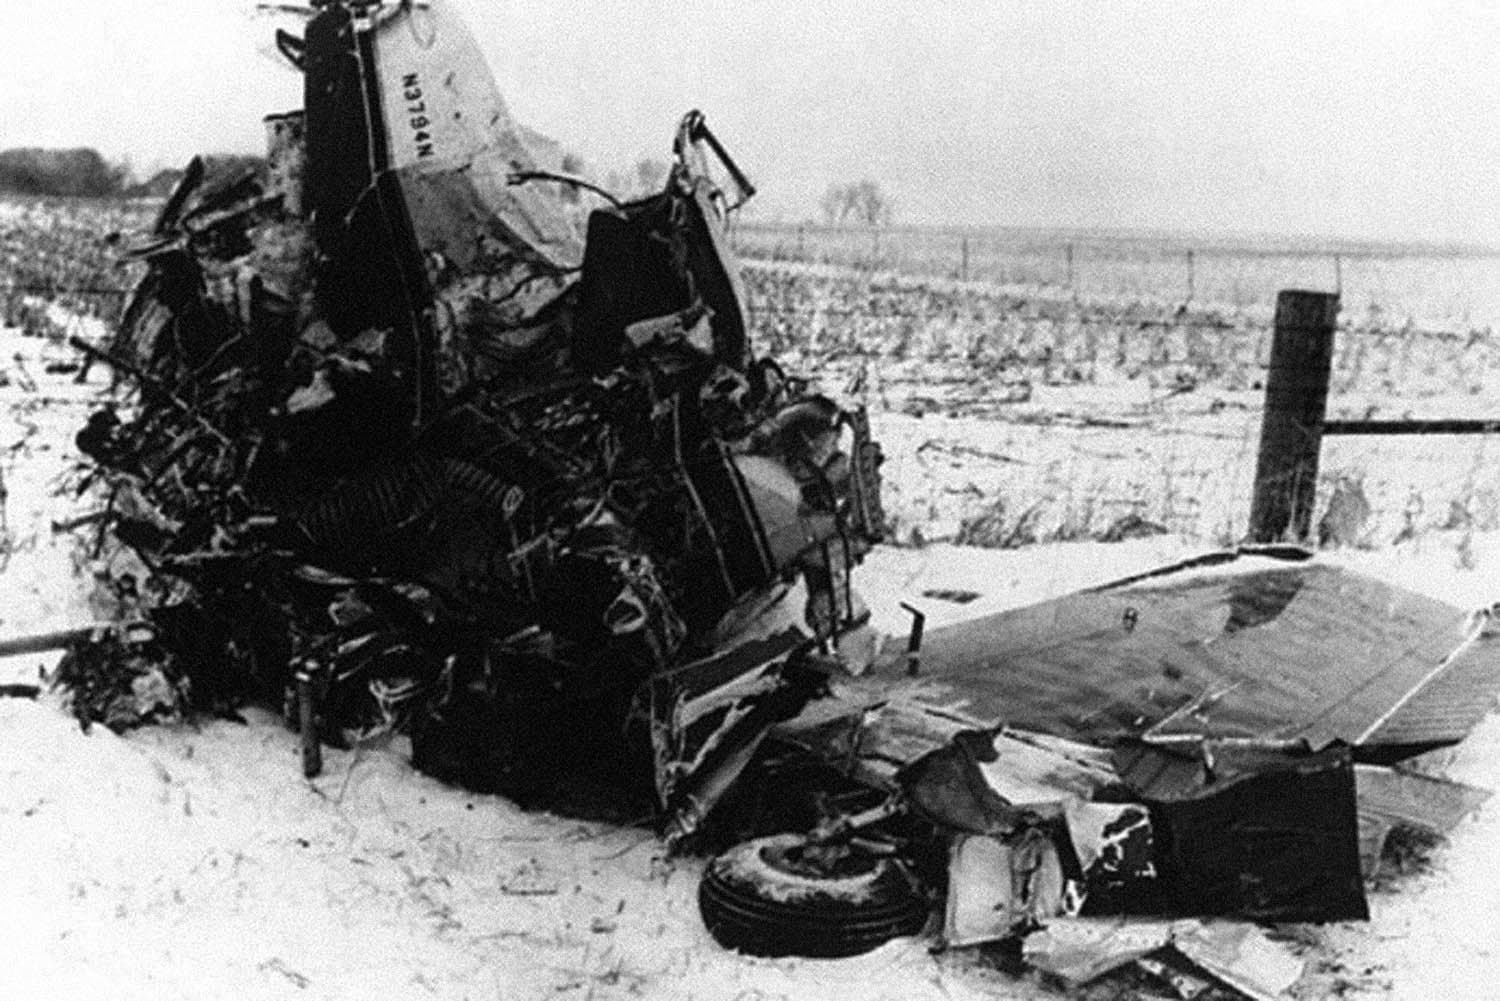 The Day the Music Died. The wreckage of the plane that carried rock and roll musicians Buddy Holly, Ritchie Valens, and "The Big Bopper" J. P. Richardson, which crashed near Clear Lake, Iowa. 3 February 1959.